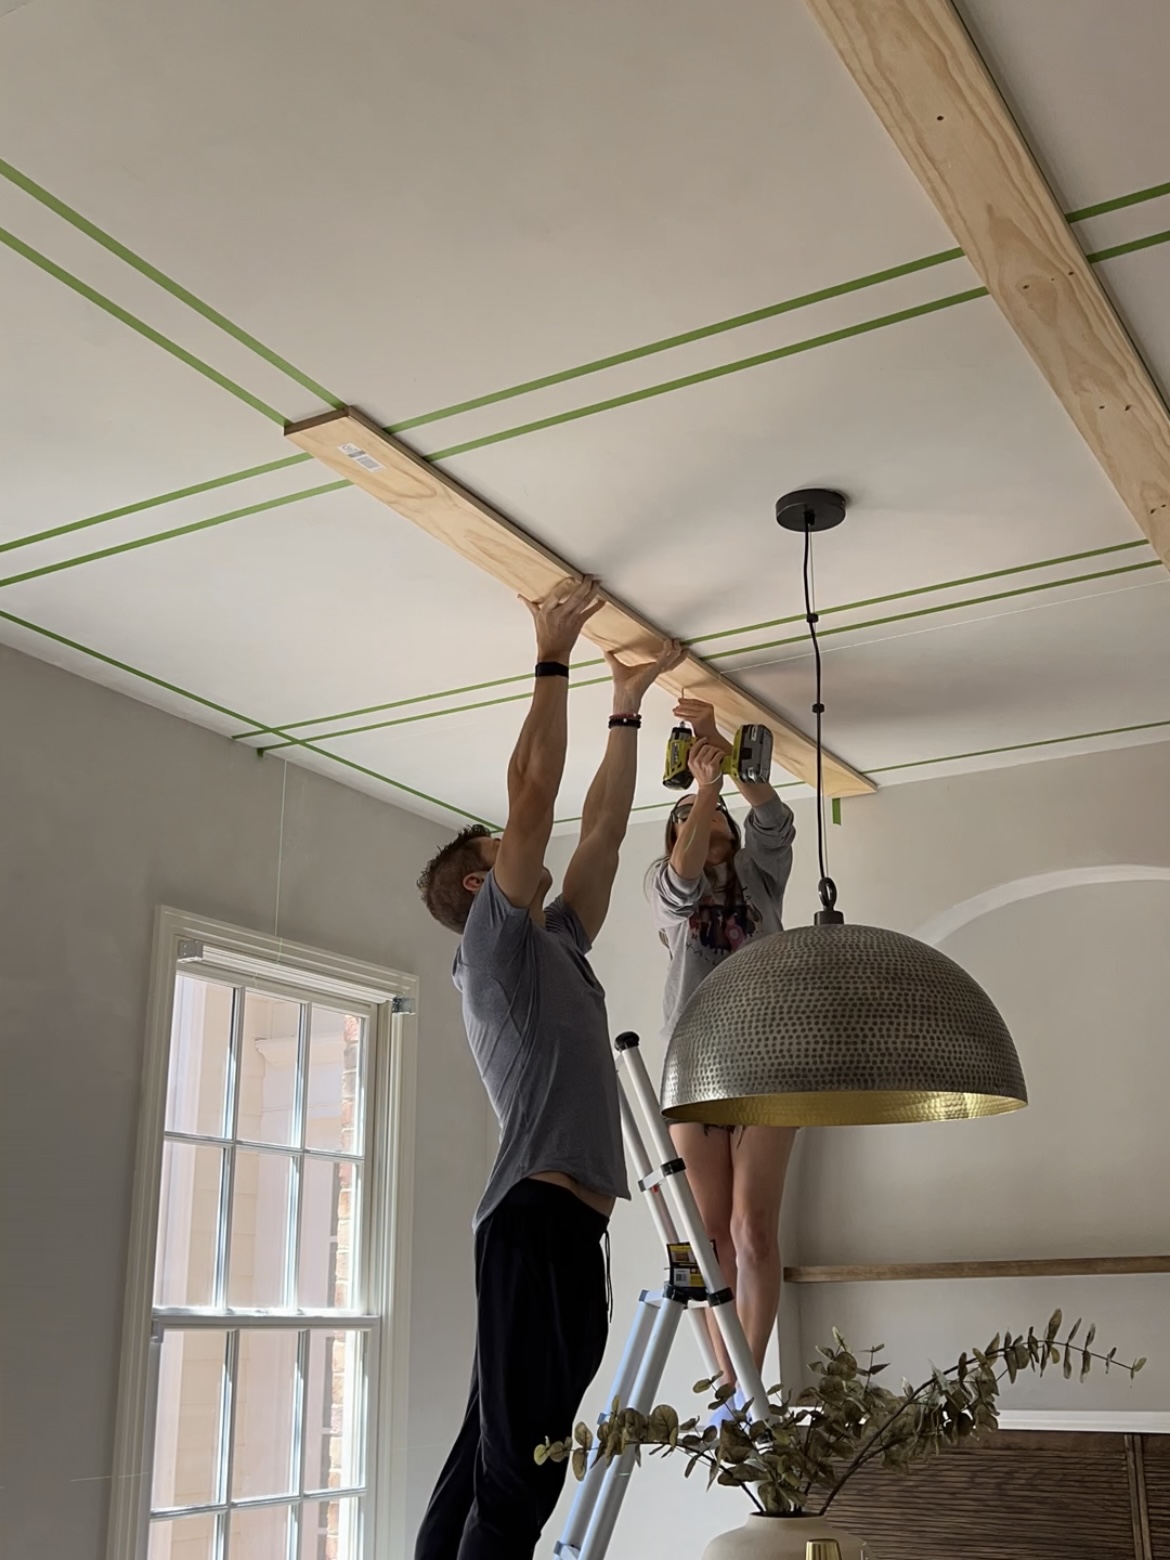 Man holds a board at the ceiling while woman uses a drill to attach the board to the ceiling.